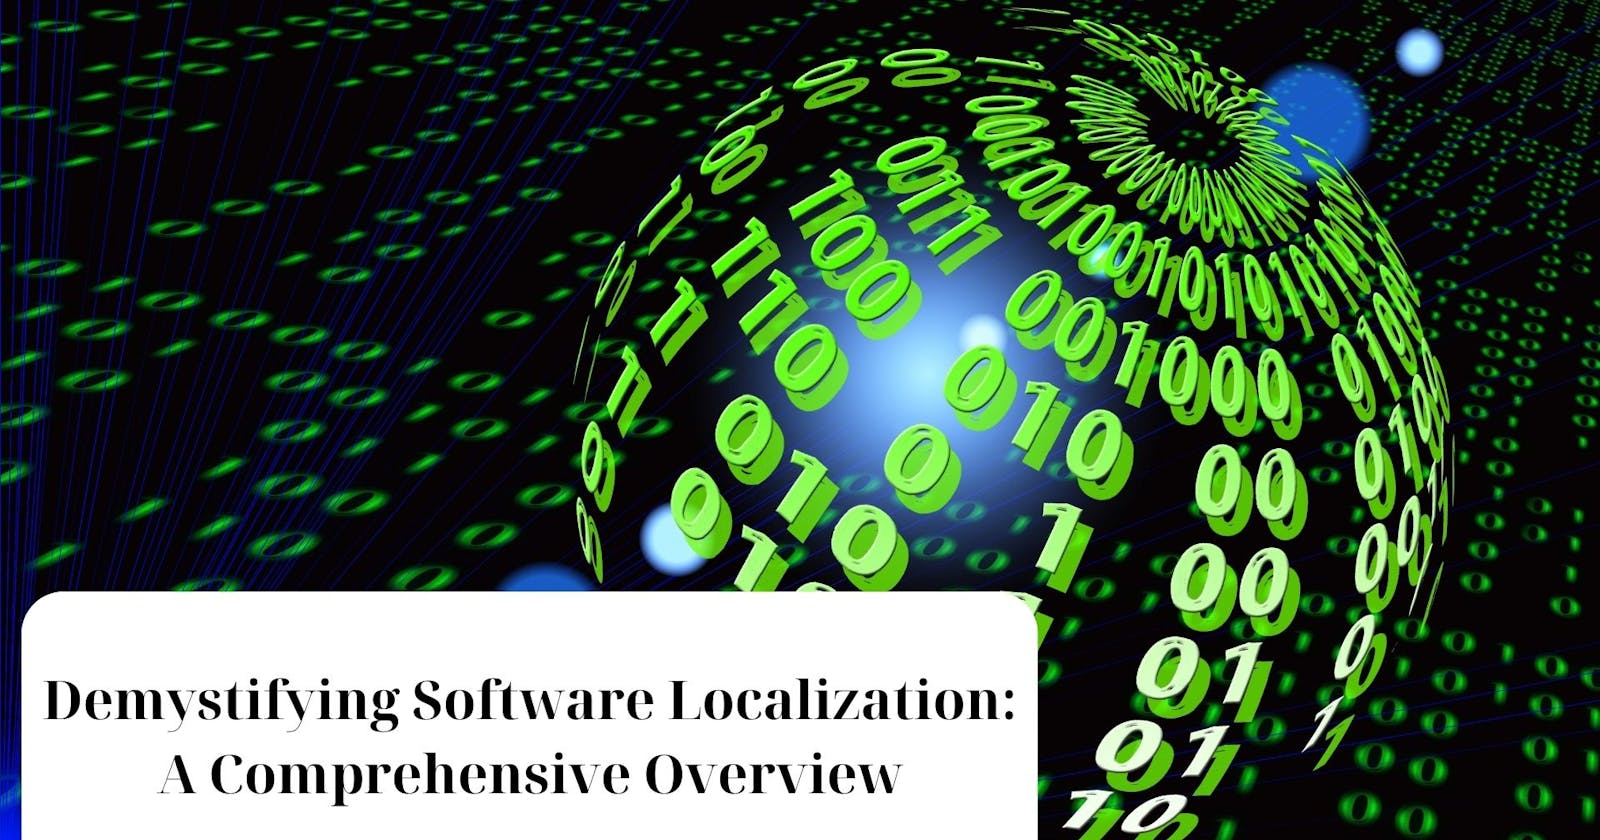 Demystifying Software Localization: A Comprehensive Overview